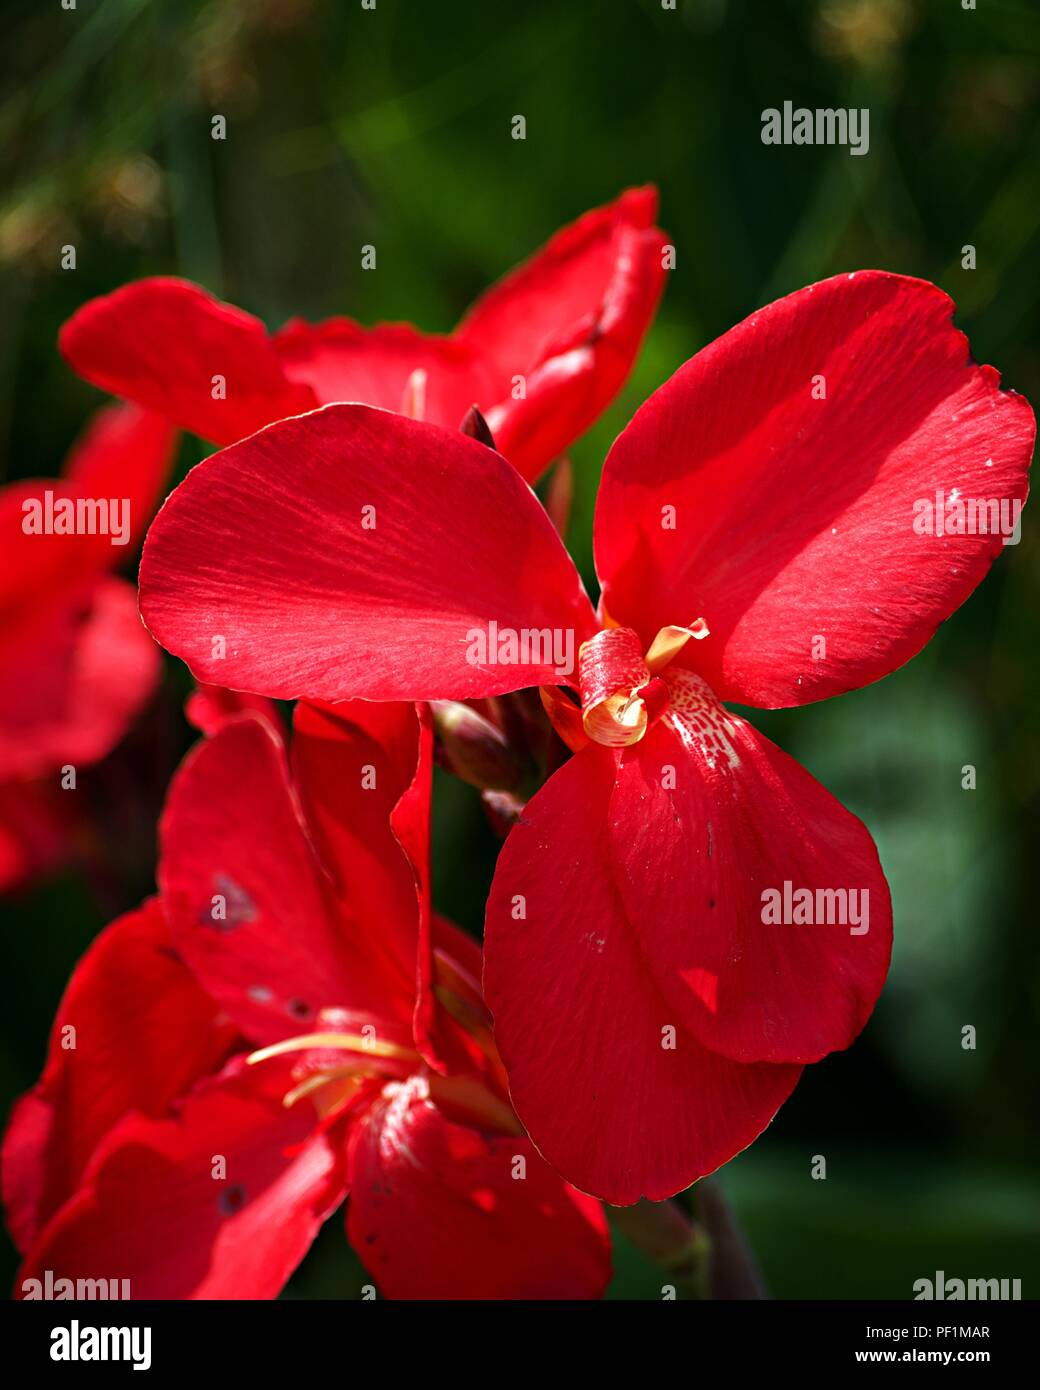 Three Pedaled Red Flower Stock Photo